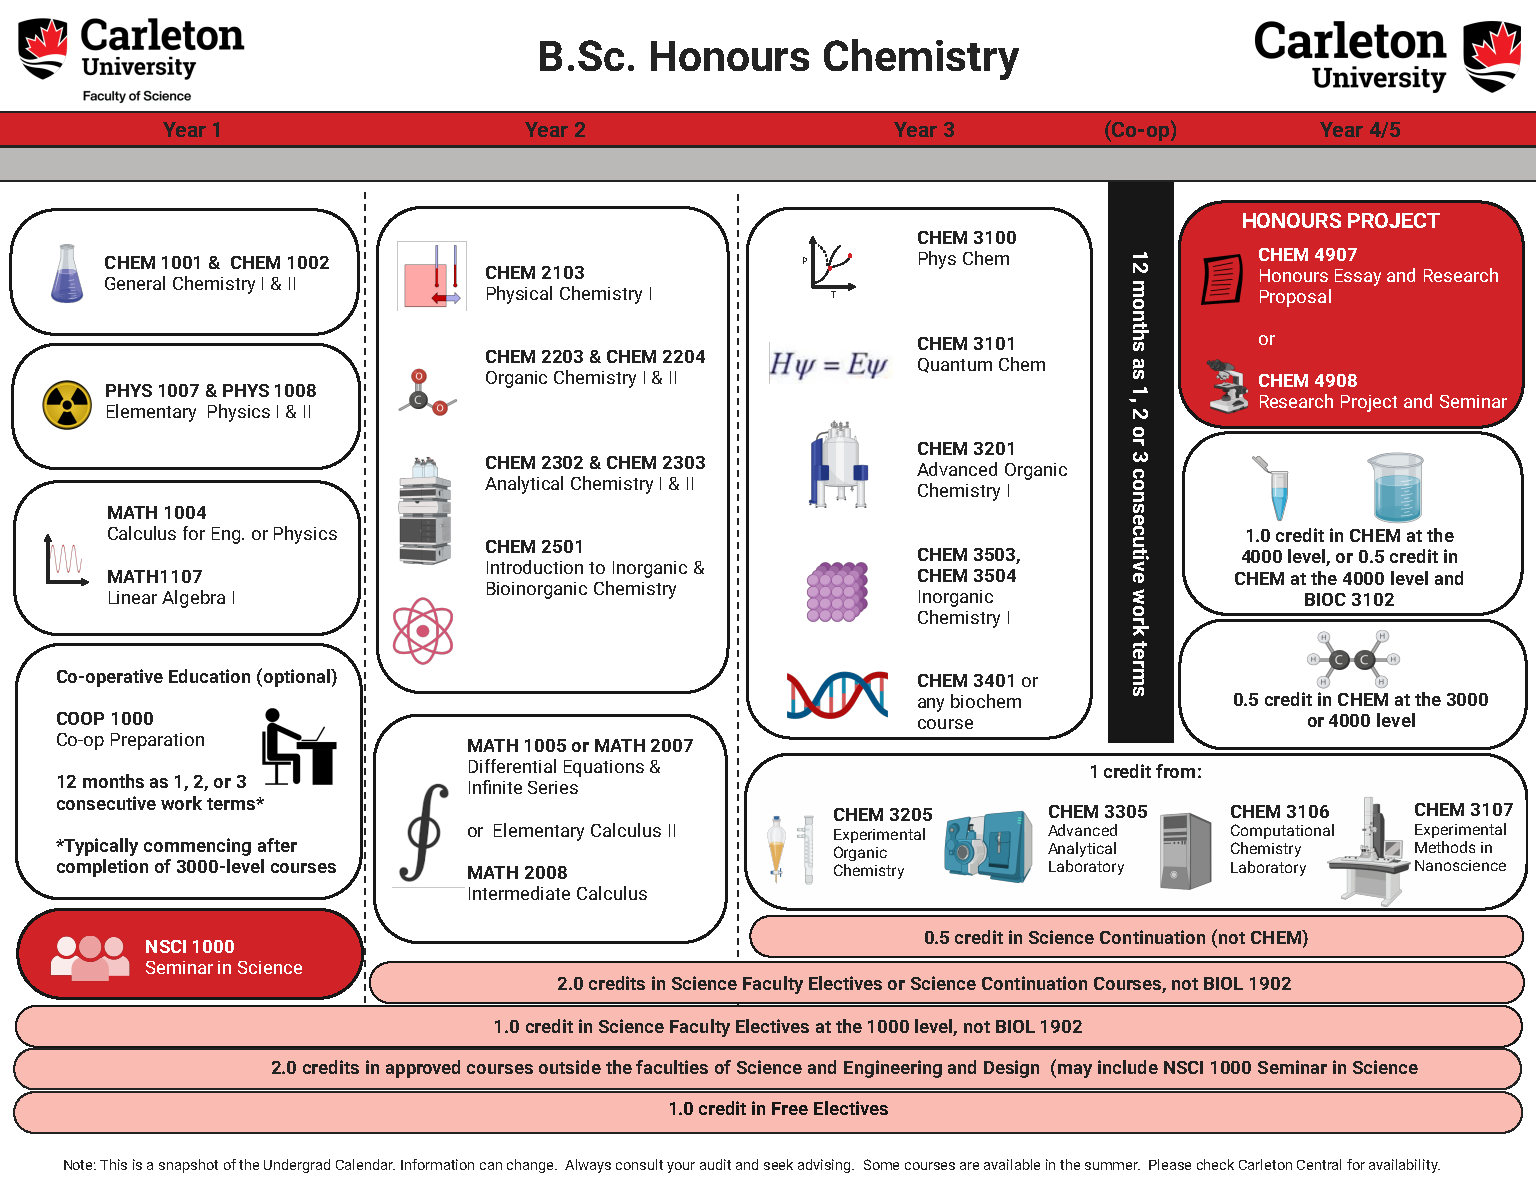 Course map for BSc. Honours Chemistry.